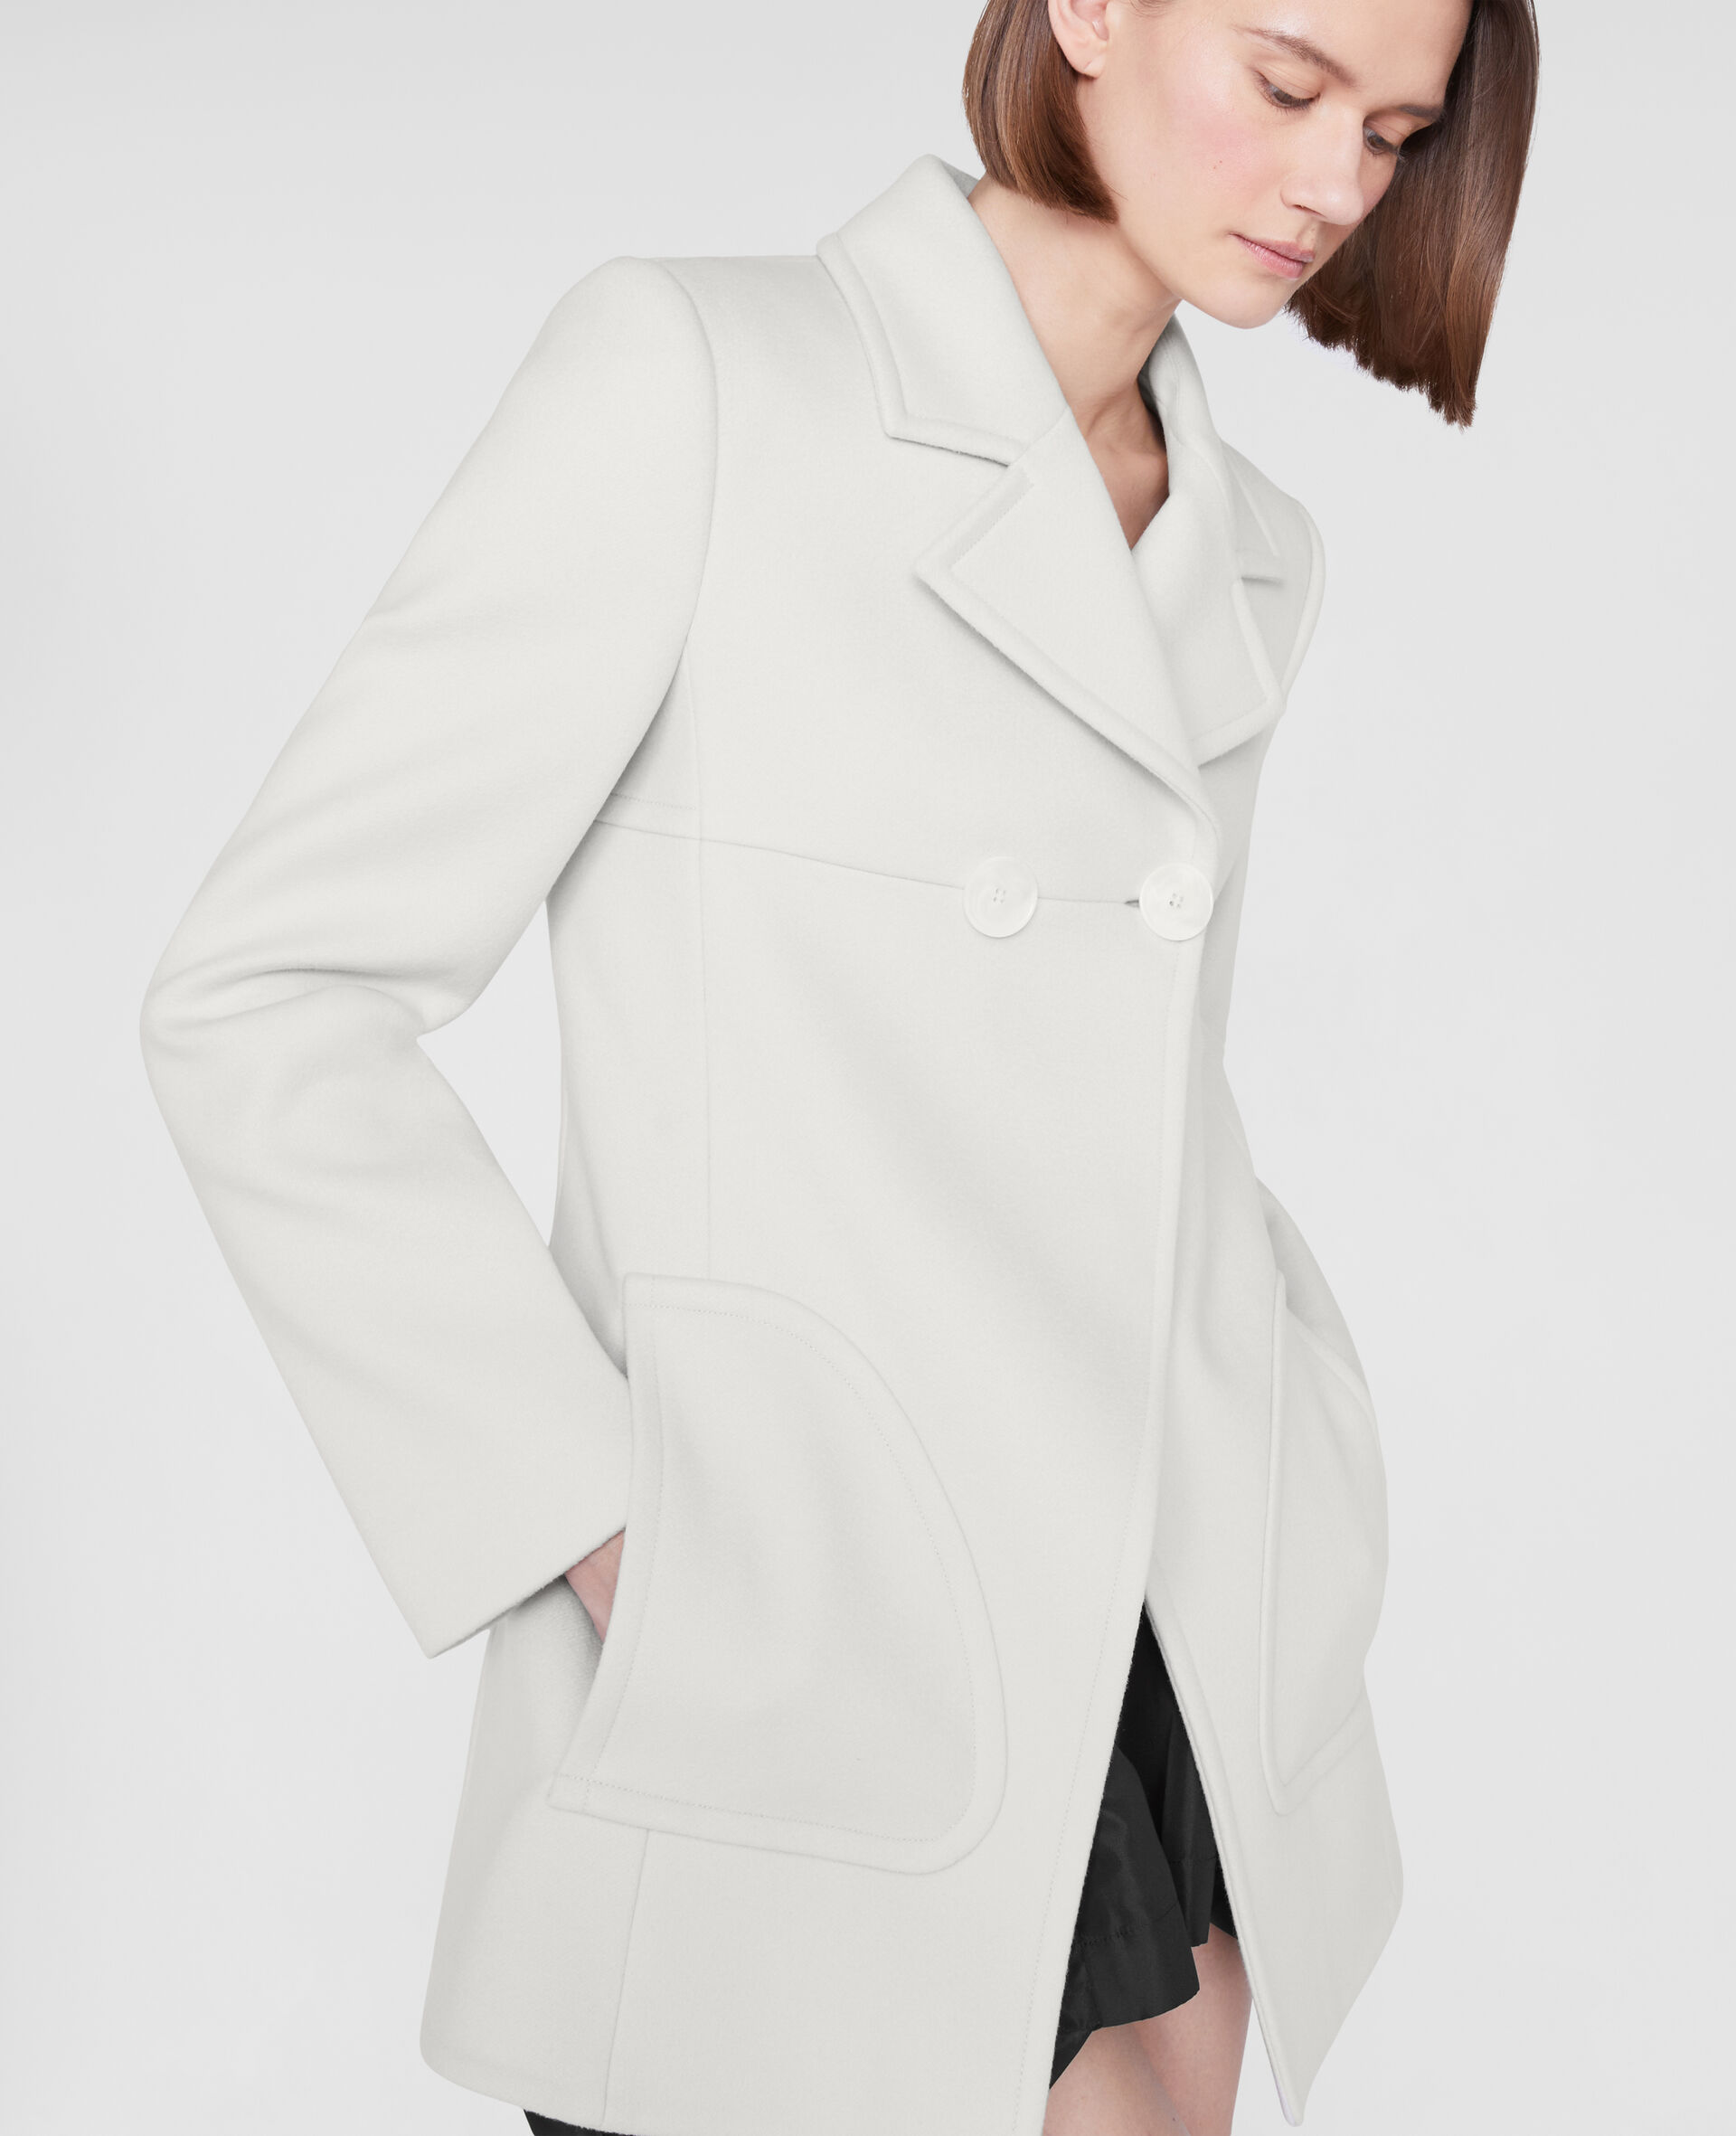 Double Breasted Coat -White-large image number 3